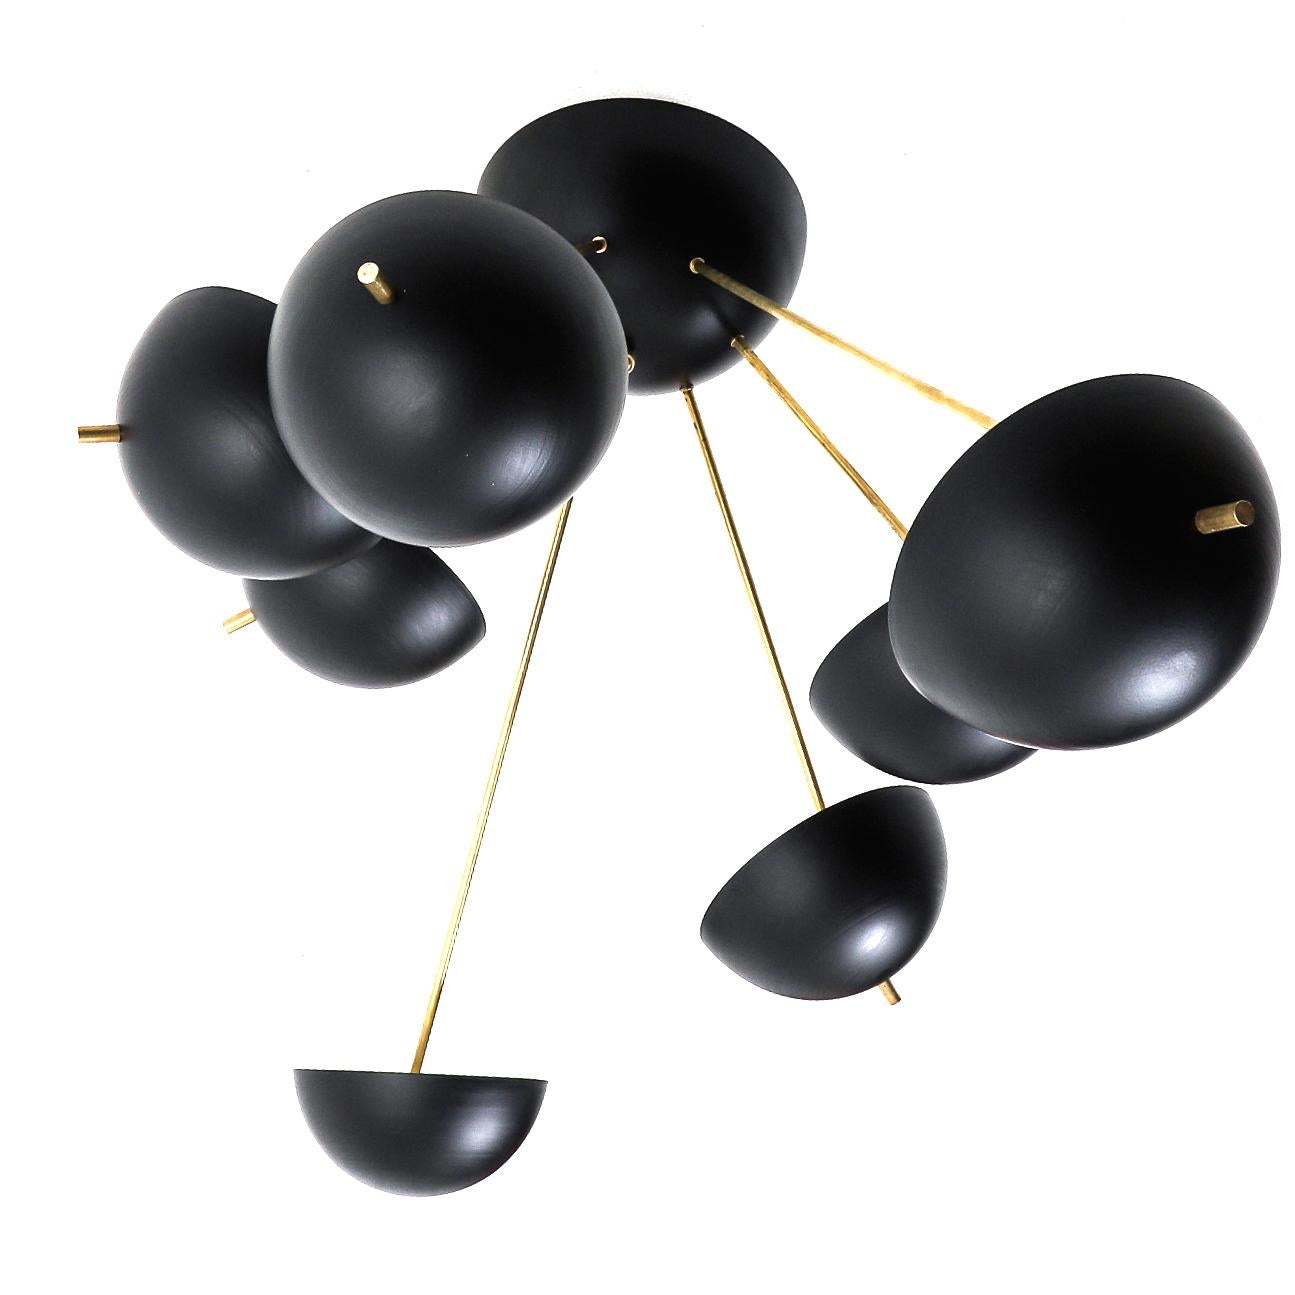 An impressive candelier with seven arms. Made in Italy. This Sputnik Ceiling Lamp is an hommage to the designer Gino Sarfatti and was handmade by a qualified manufacturer. It is made of patinated brass, the lamp shades are lacquered in black (matt)